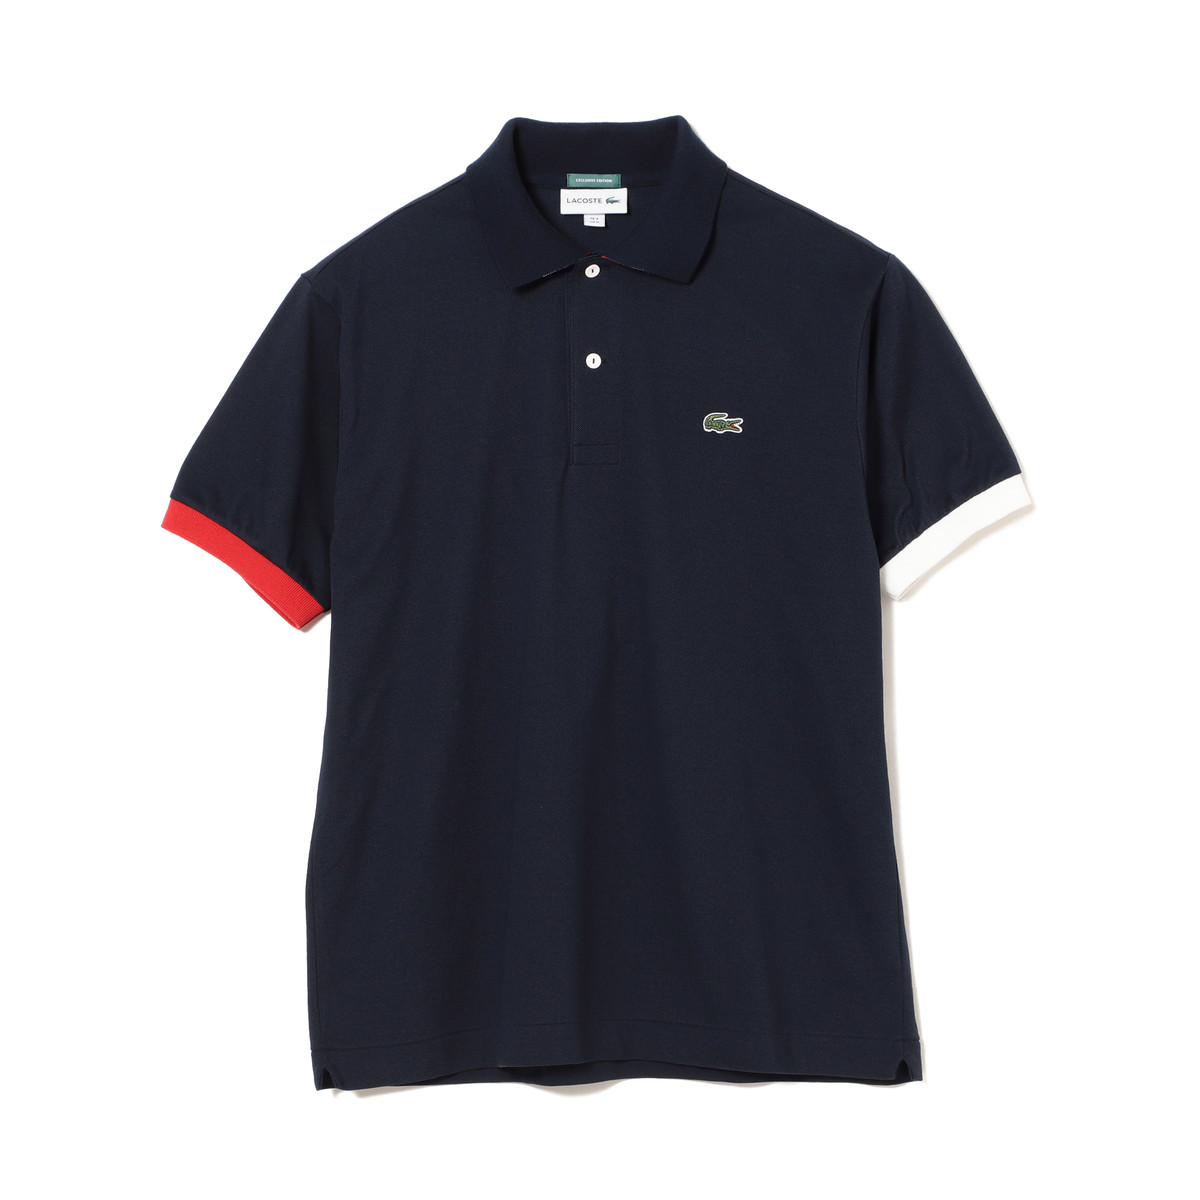  LACOSTE×BEAMS GOLF 別注 エリTRICO ポロシャツ 